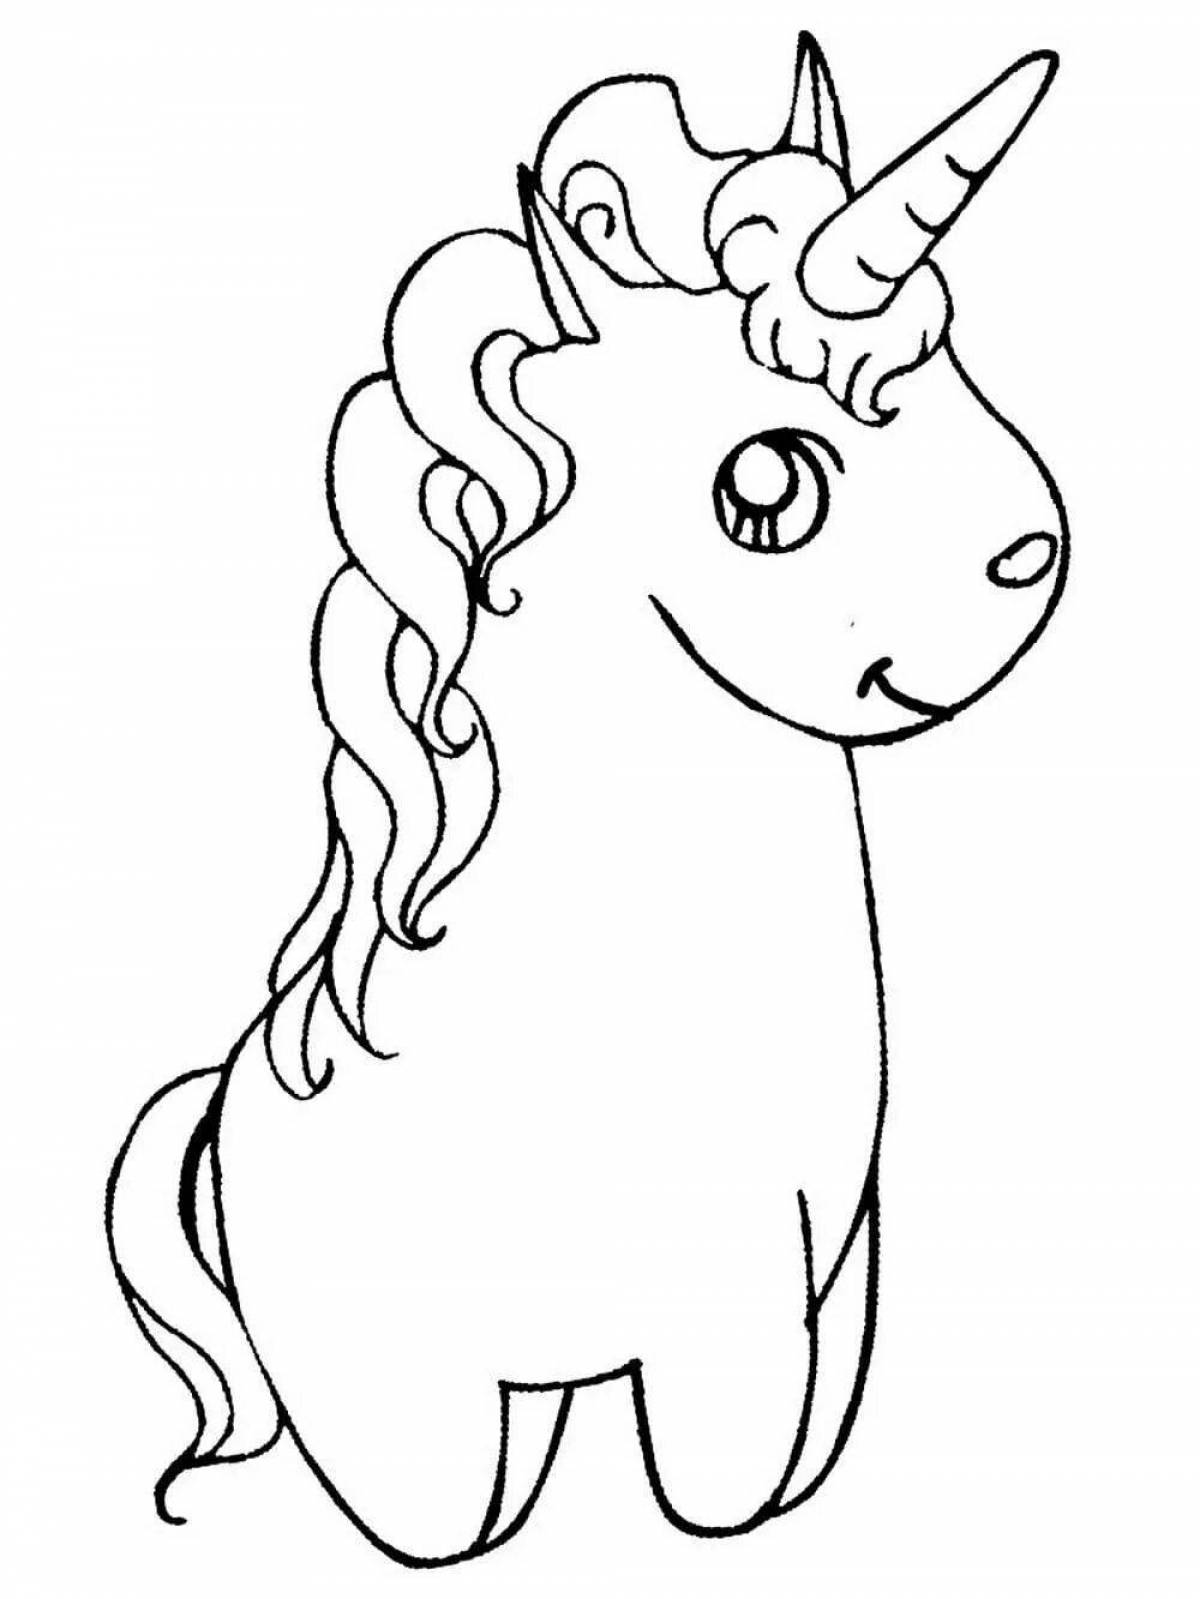 Majestic coloring drawing of a unicorn